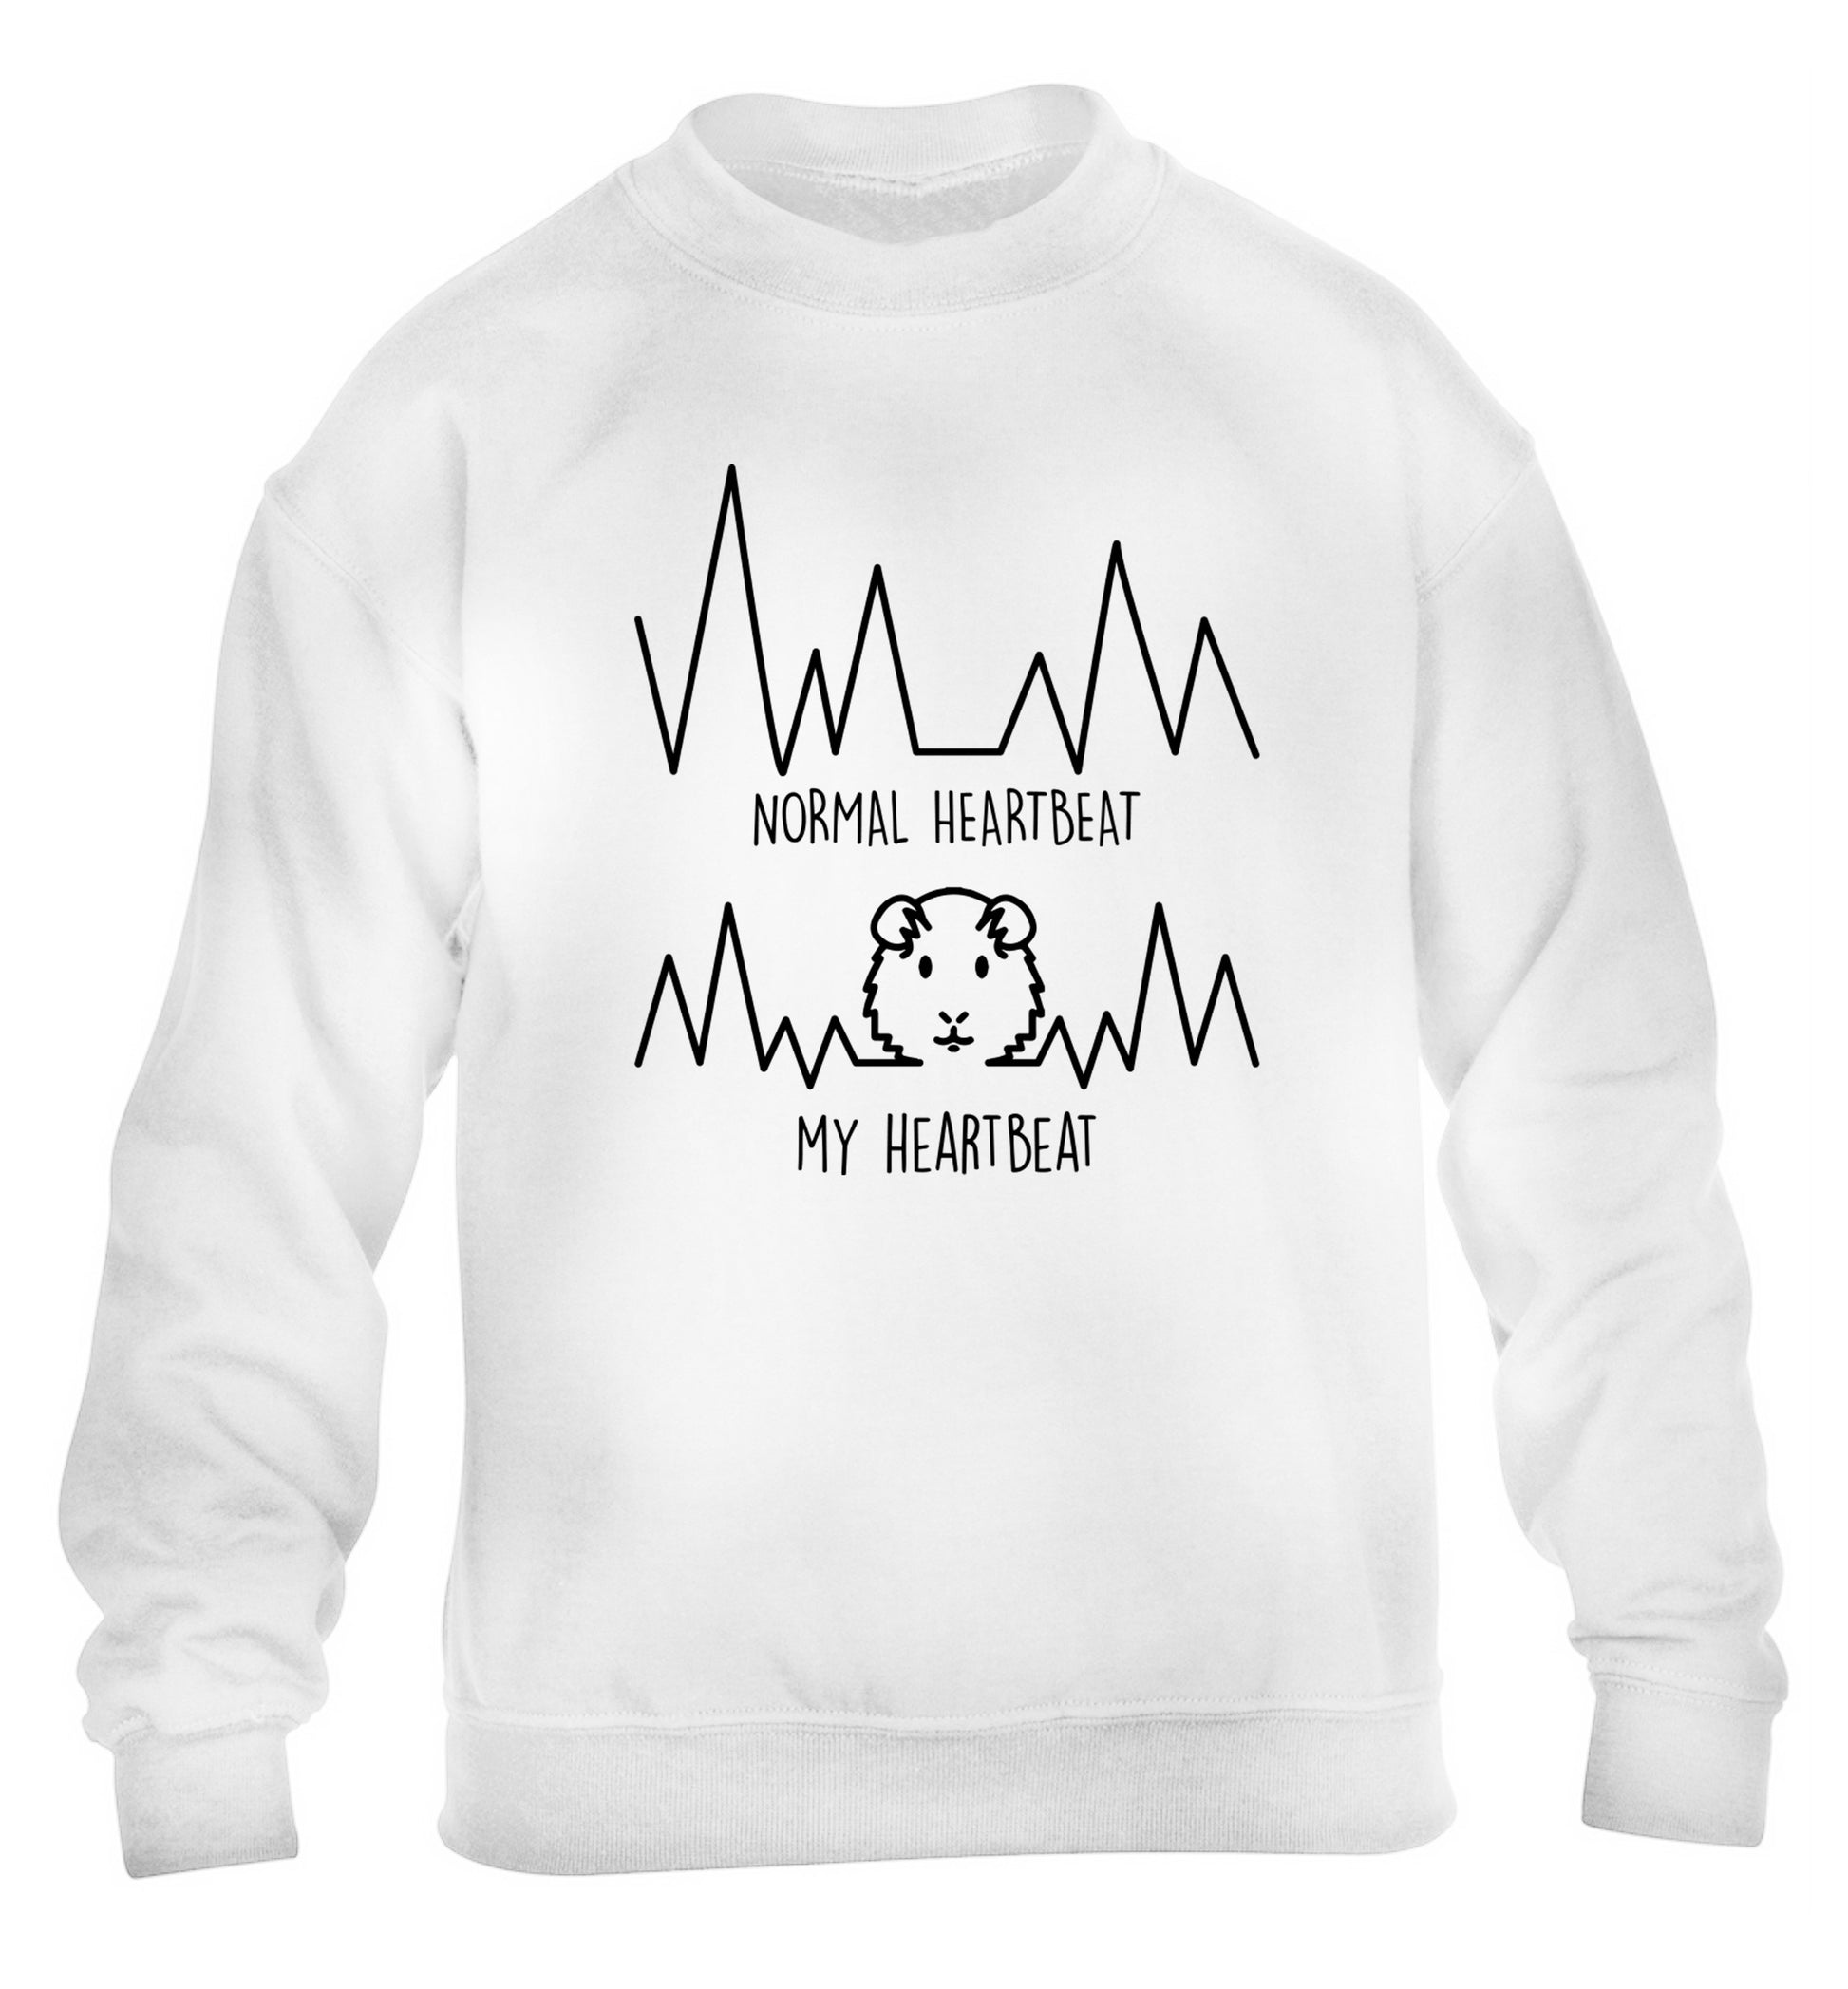 Normal heartbeat vs my heartbeat guinea pig lover children's white  sweater 12-14 Years